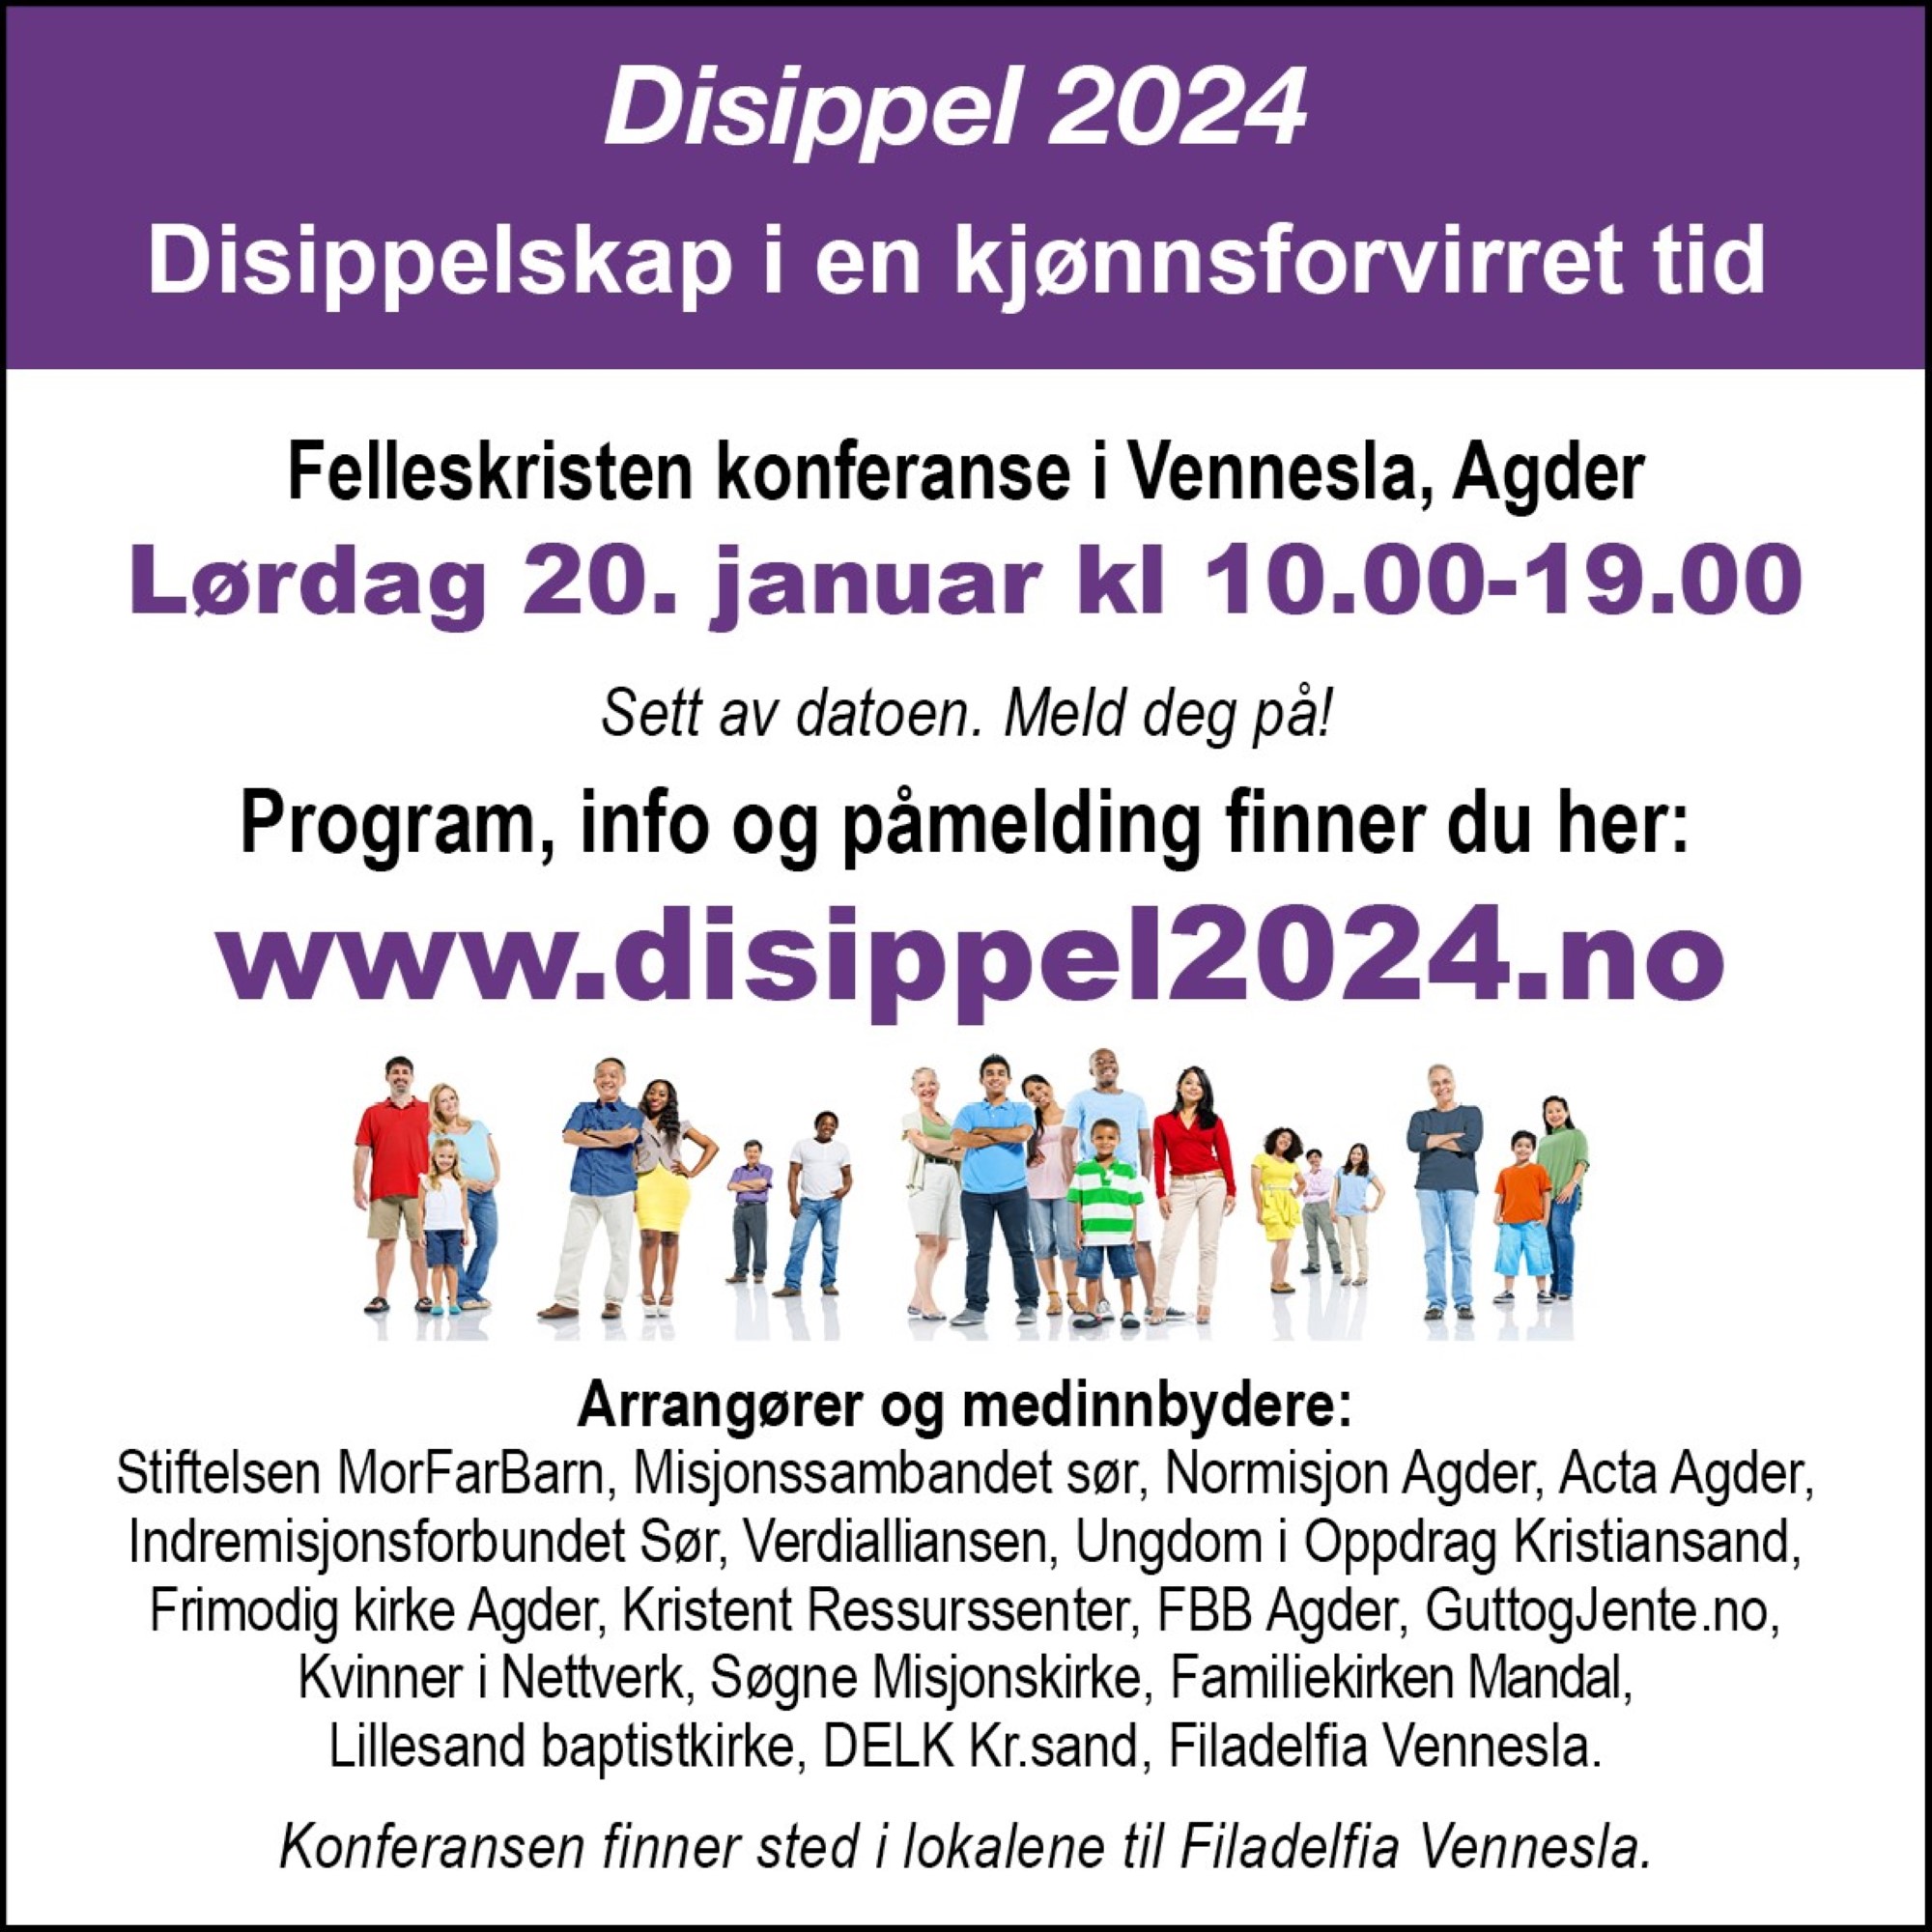 Disippel 2024